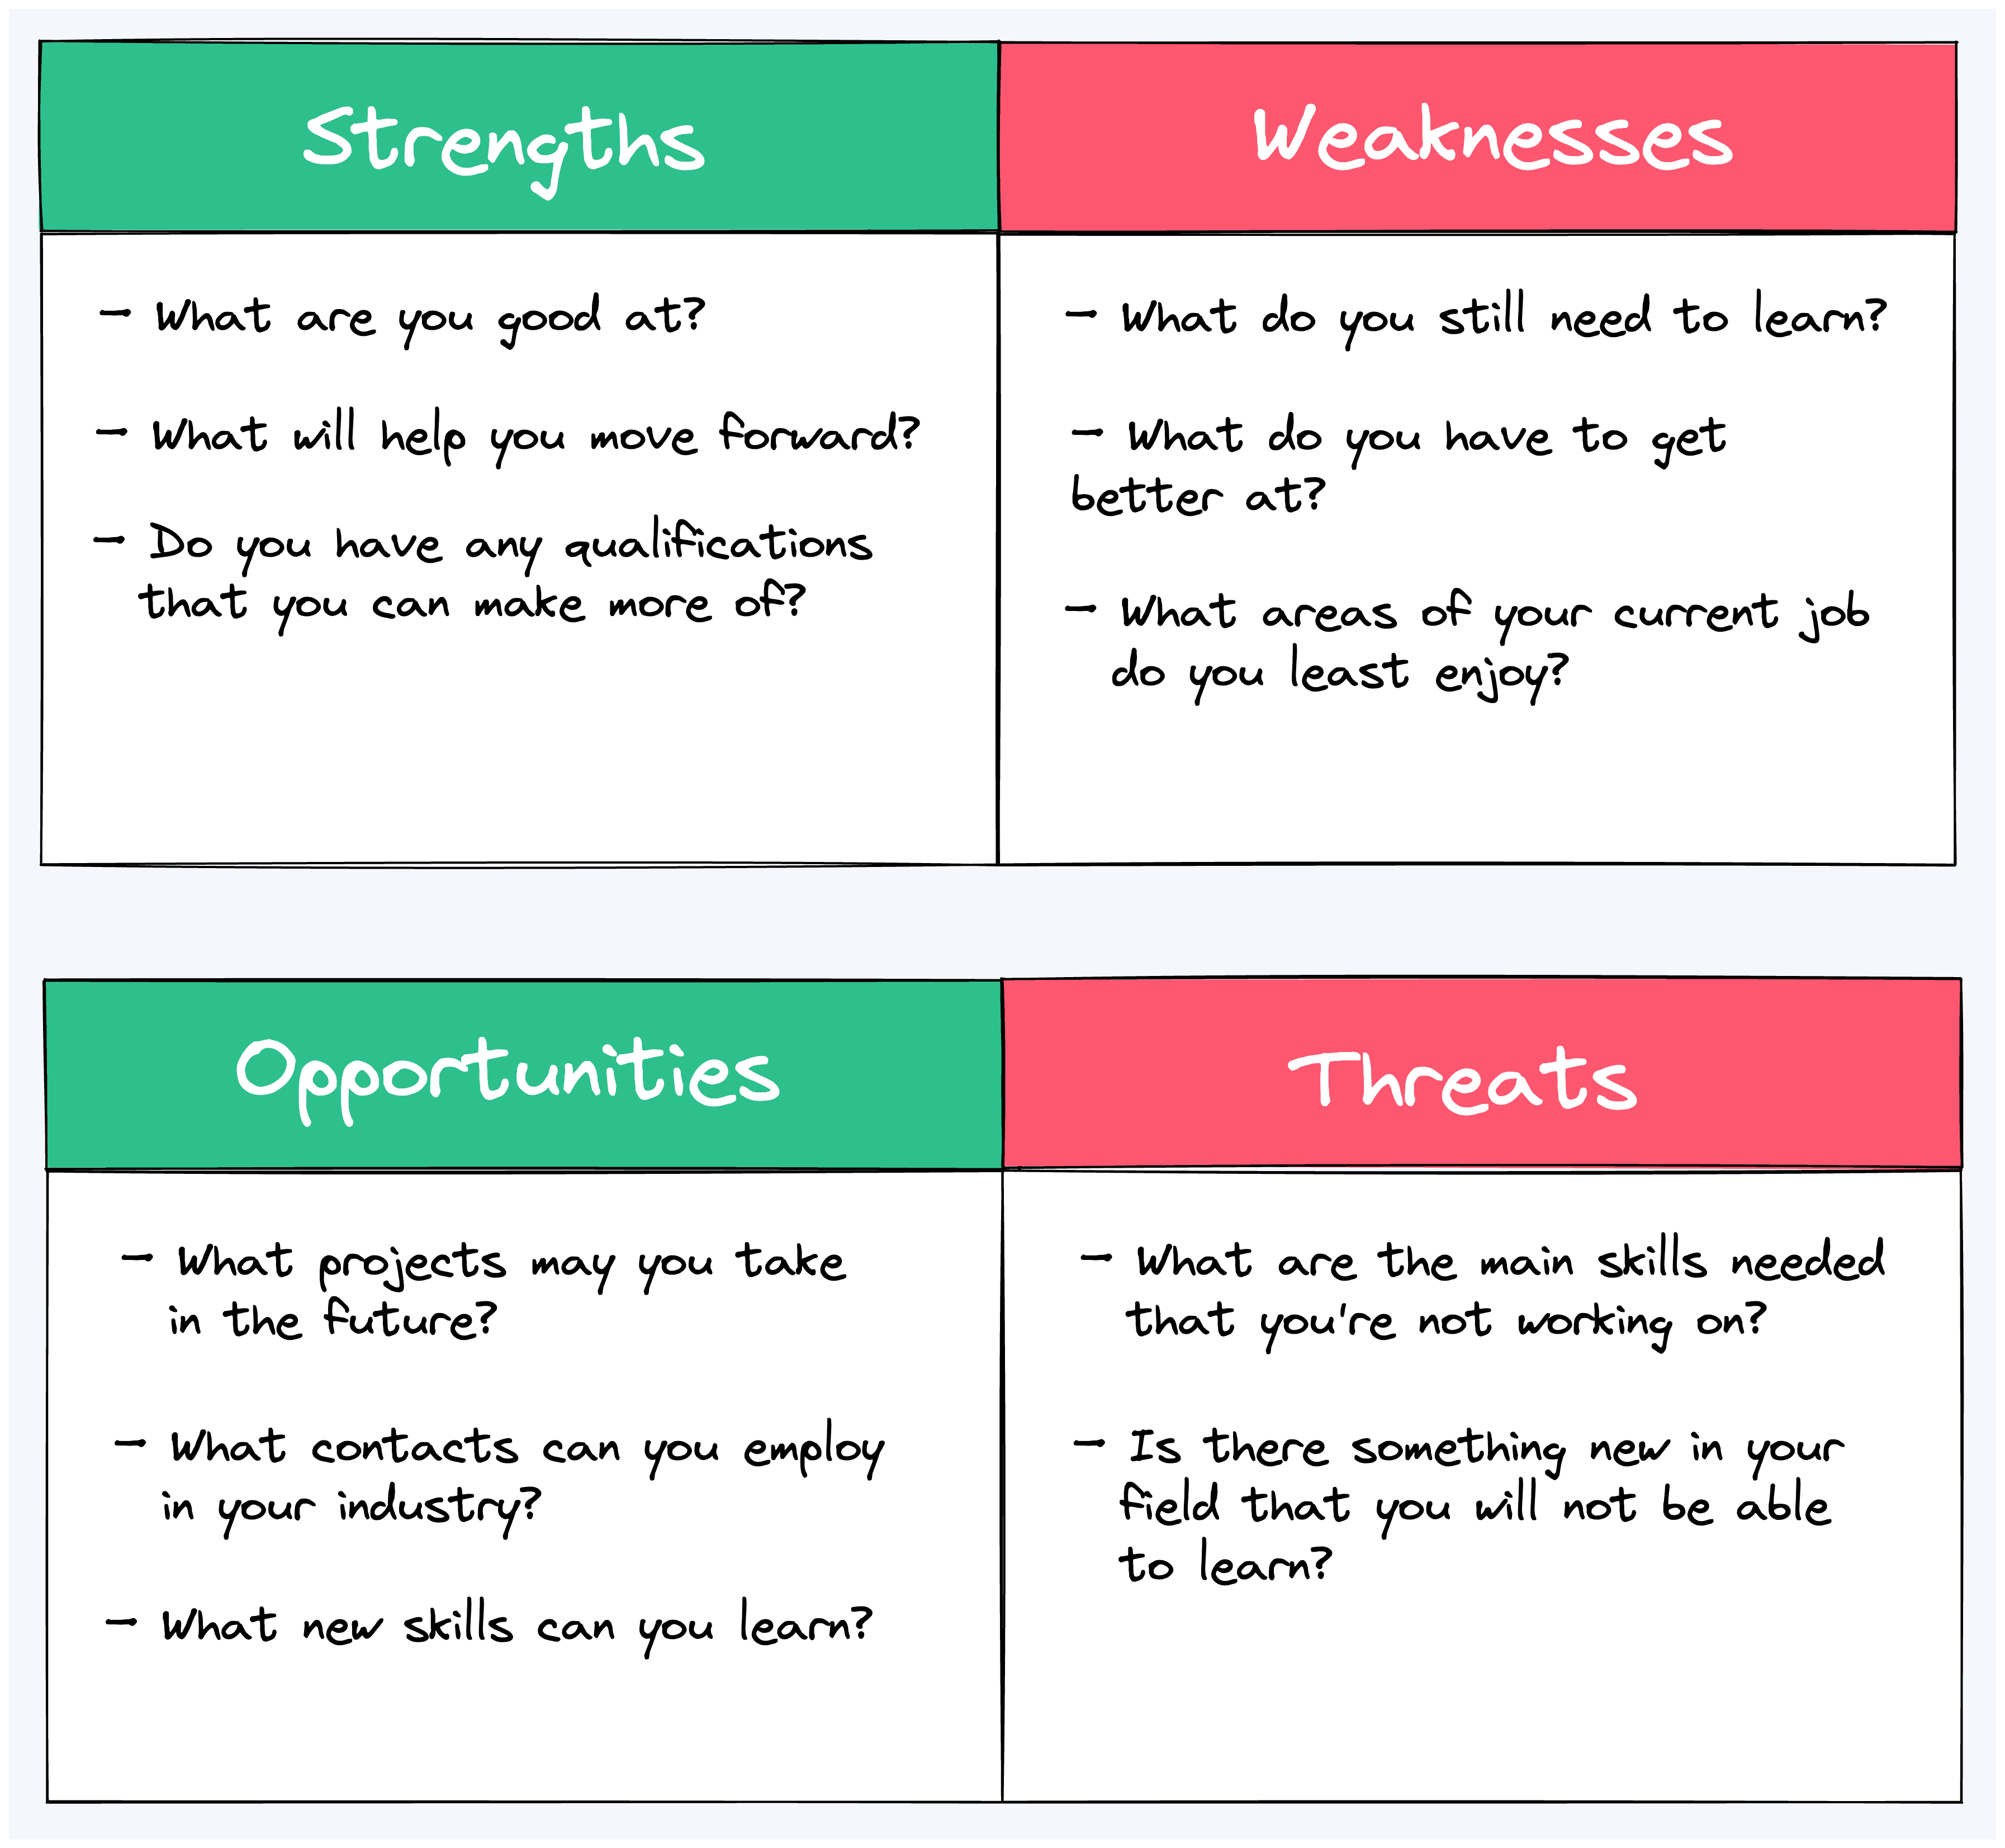 personal-swot-analysis (1) (1).png